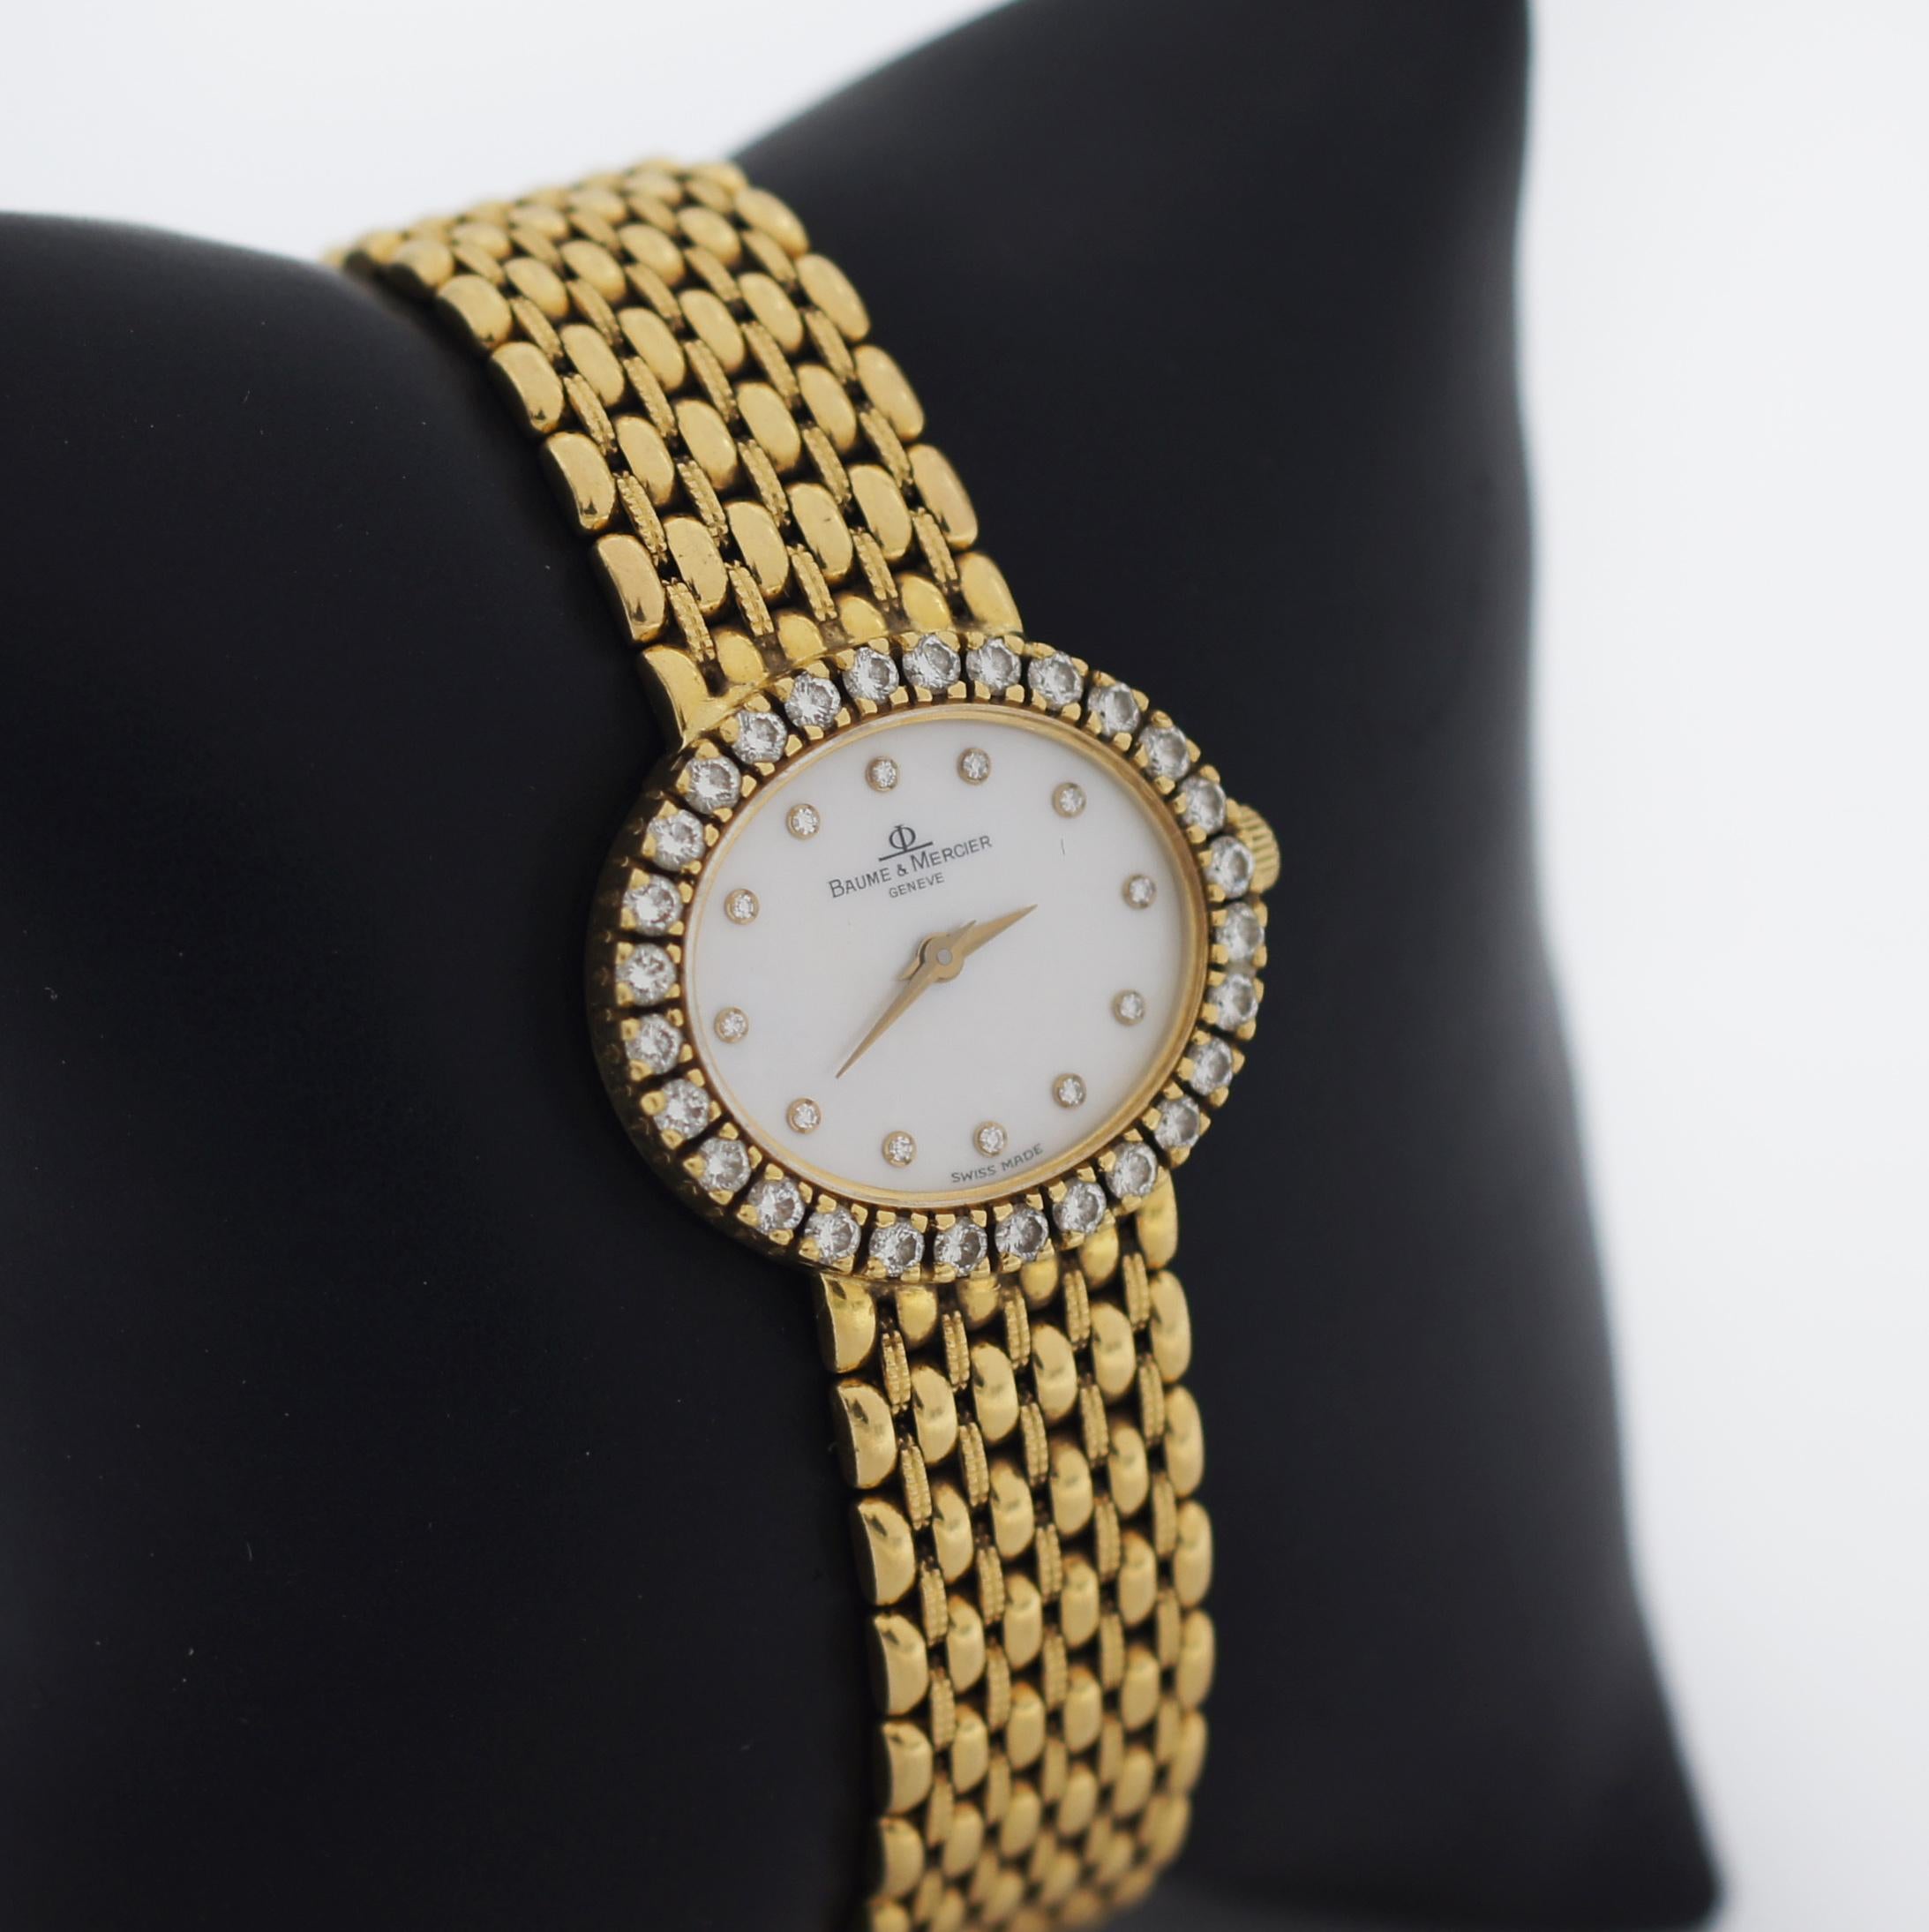 Baume & Mercier
Model Number: 18310 9
18k Yellow Gold Case and Bracelet
28 Natural Diamond Bezel 
Approx. Total Carats: 1.12ctw
Round Brilliant Cut
Color: G - H
Clarity: VS1 - VS2
Mother of Pearl Dial with Gold hands and 12 Diamonds